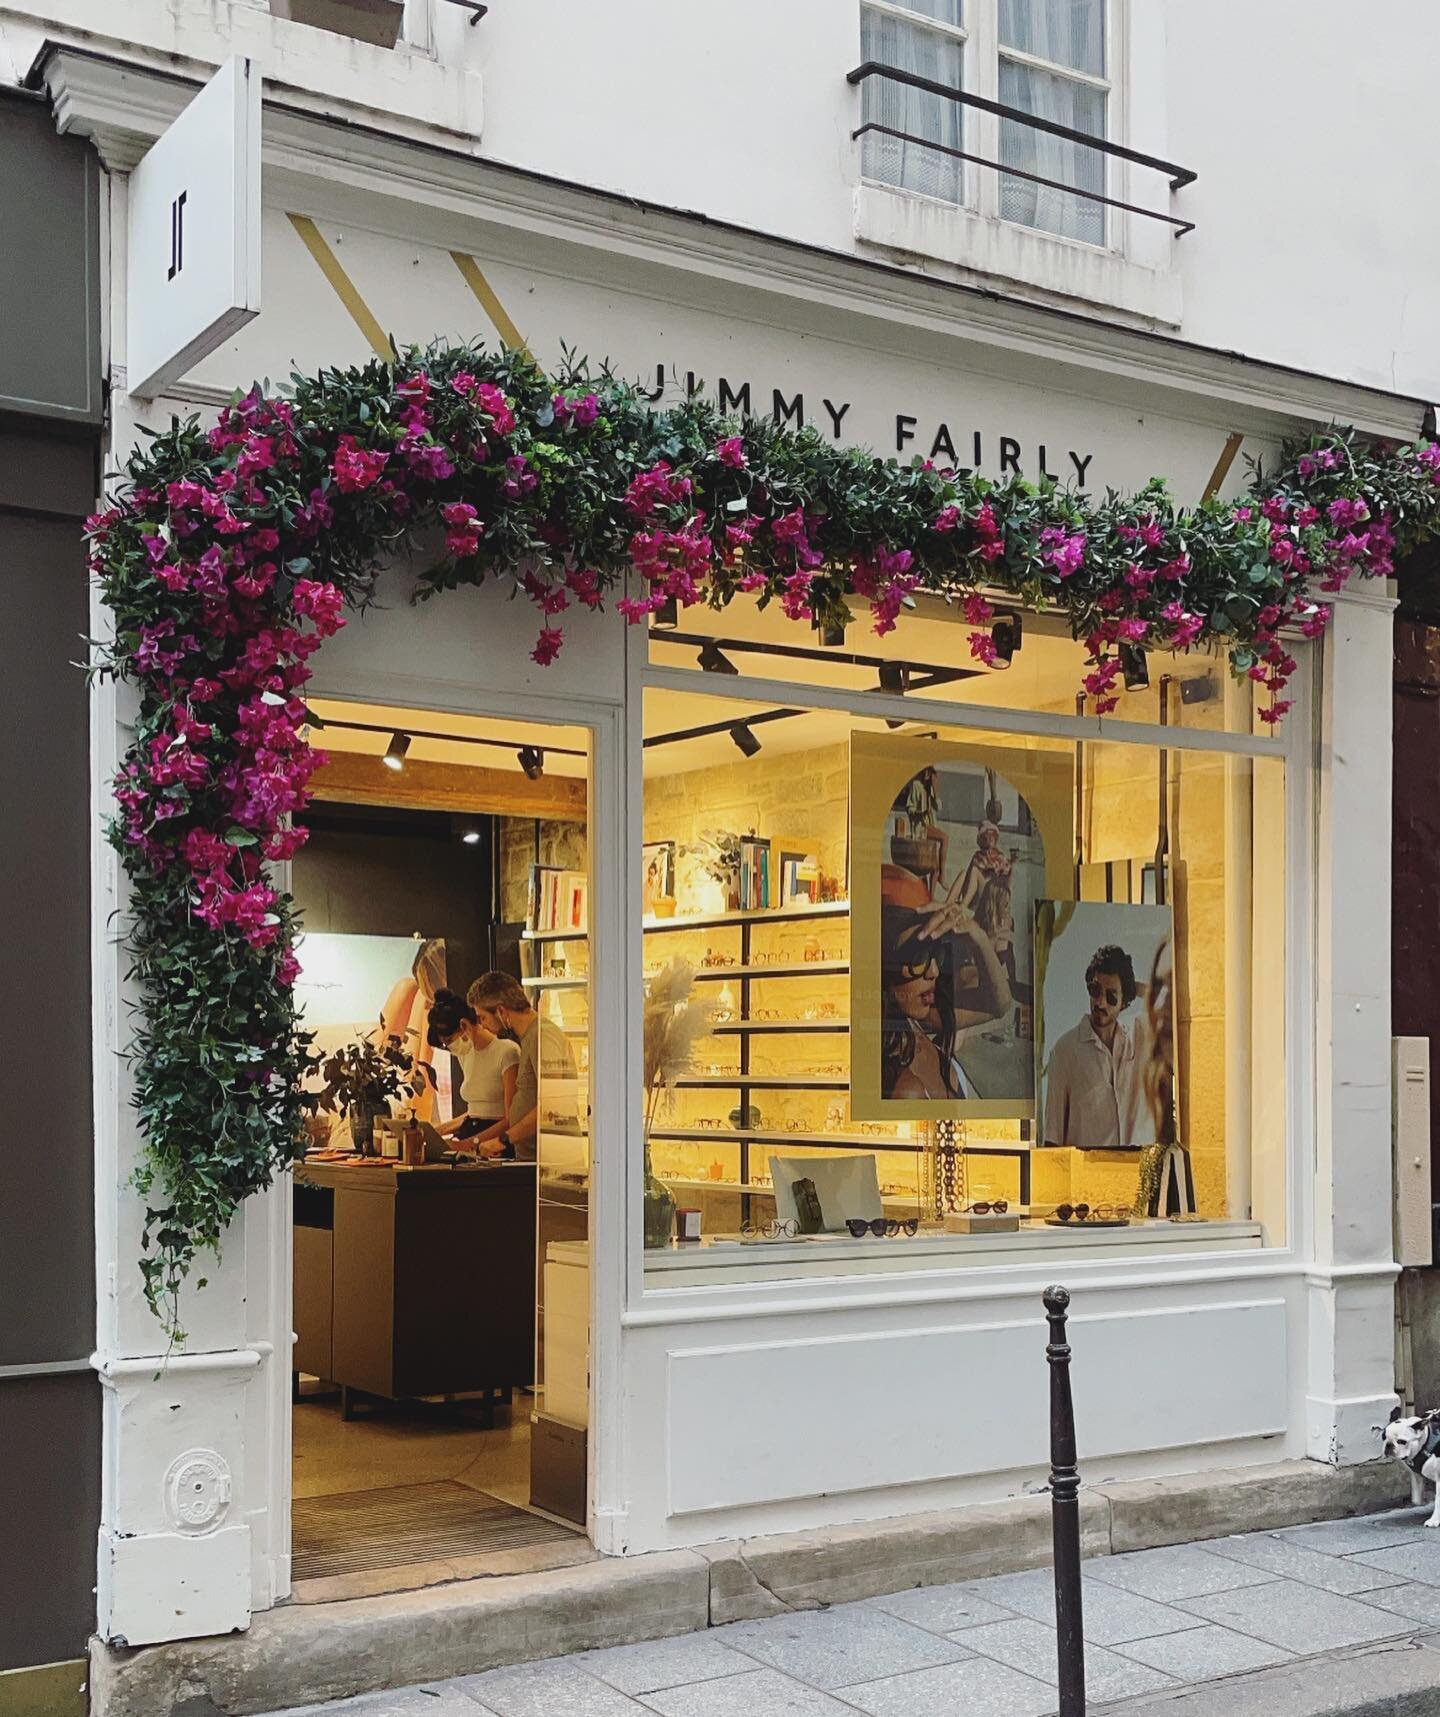 loving being back in Paris &amp; perusing all the storefronts in the Marais! I especially like the @jimmyfairly shops {and they have a great collection of eyewear!} 🏷

#parisfashion #pariseyewear #ringstadretail #paris #retailexpansion #brandexpansi